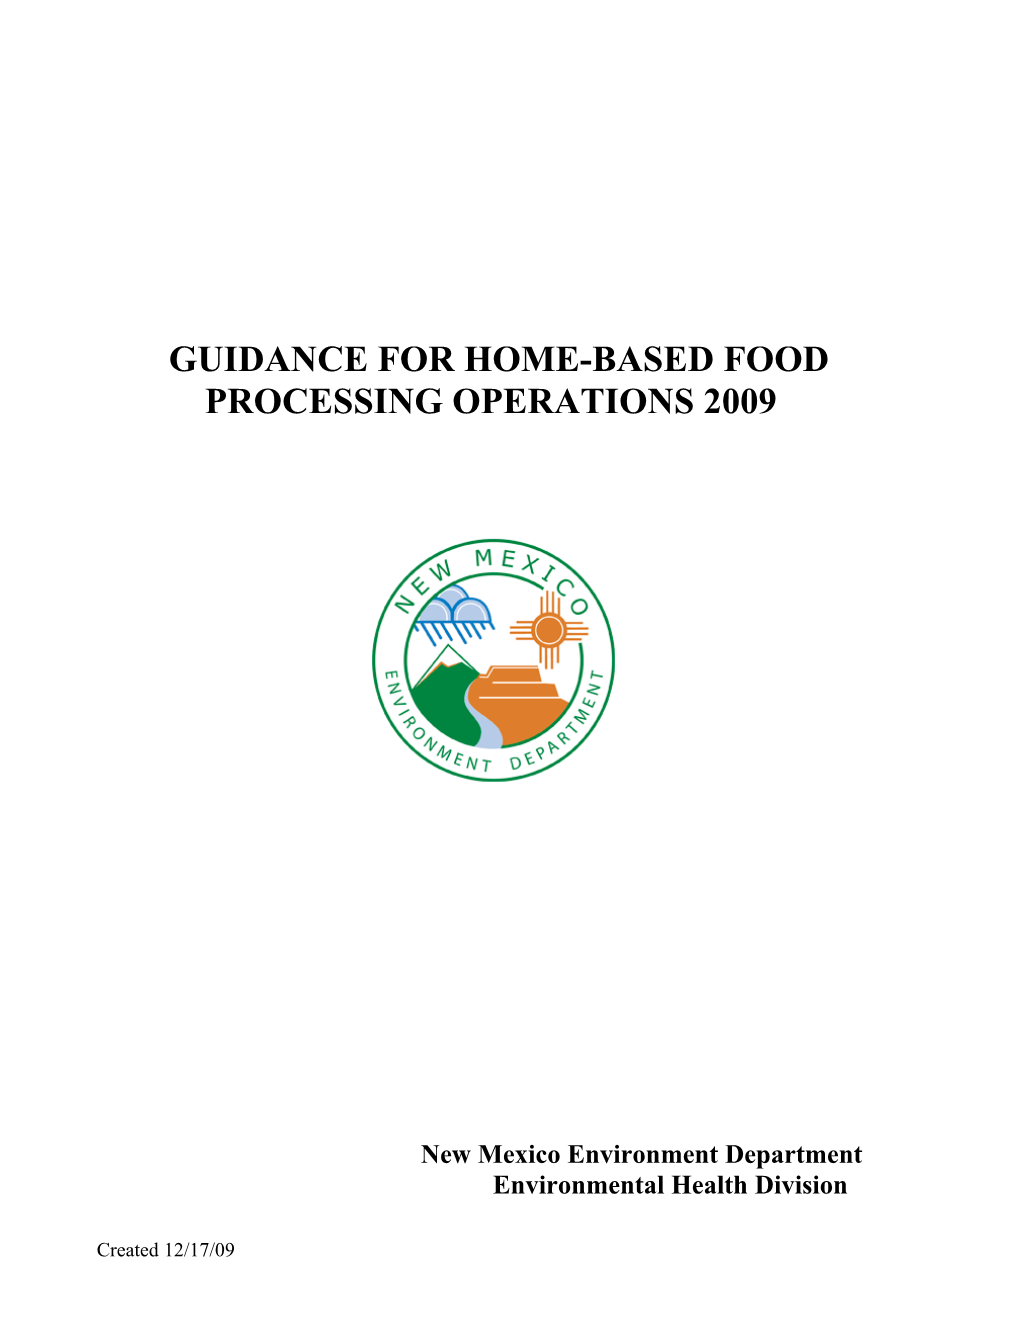 Home-Based Food Processing Operation Guidance